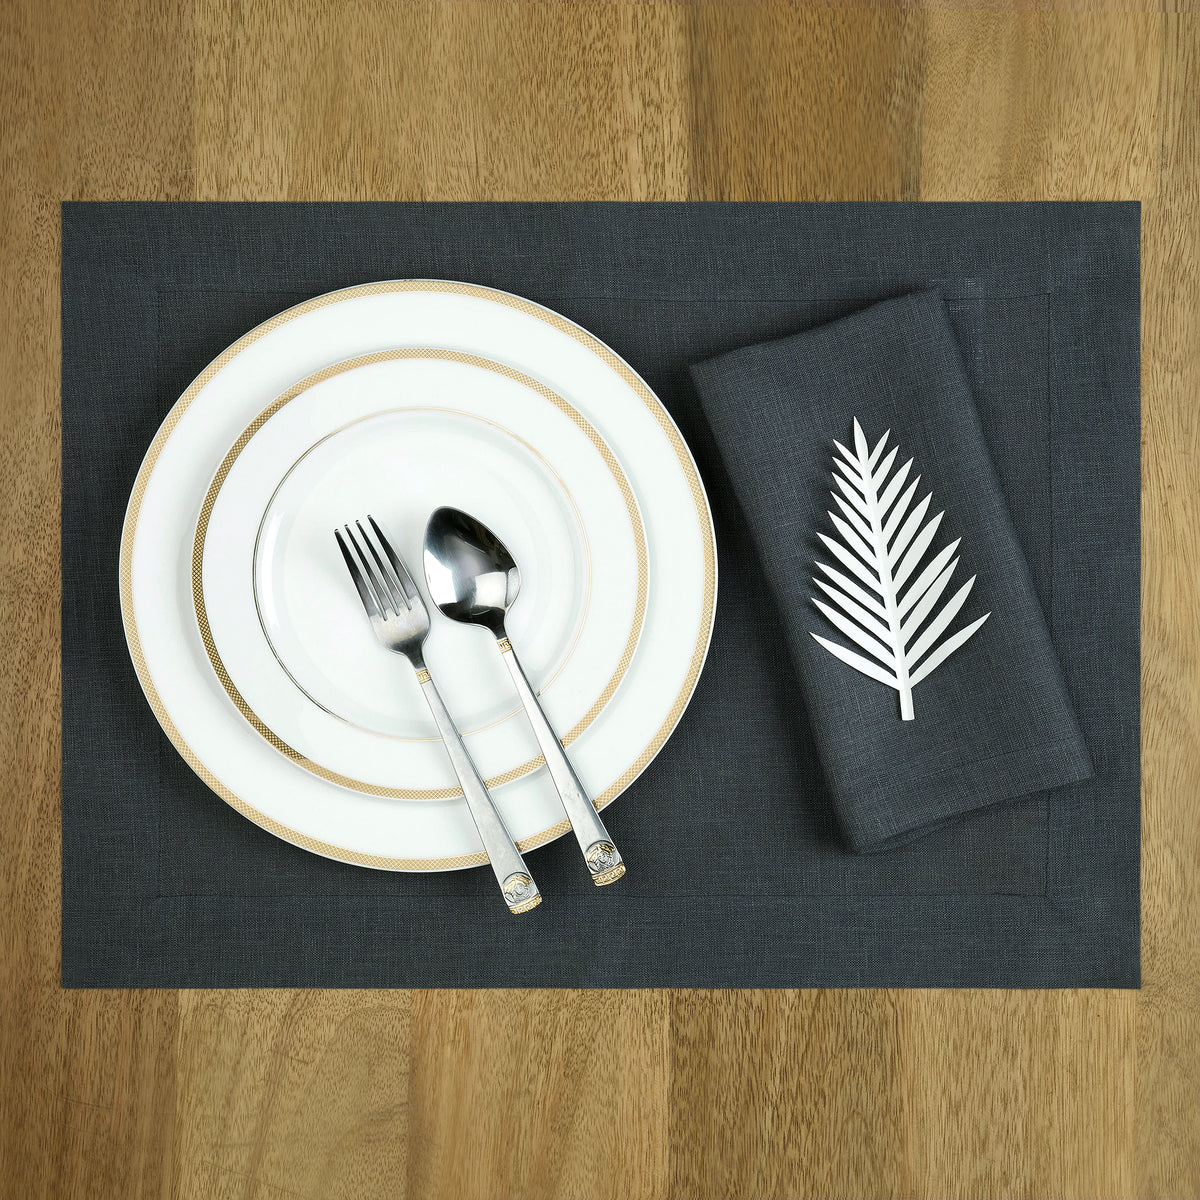 Charcoal Grey Linen Placemats 14 x 19 Inch Set of 4 - Hemmed